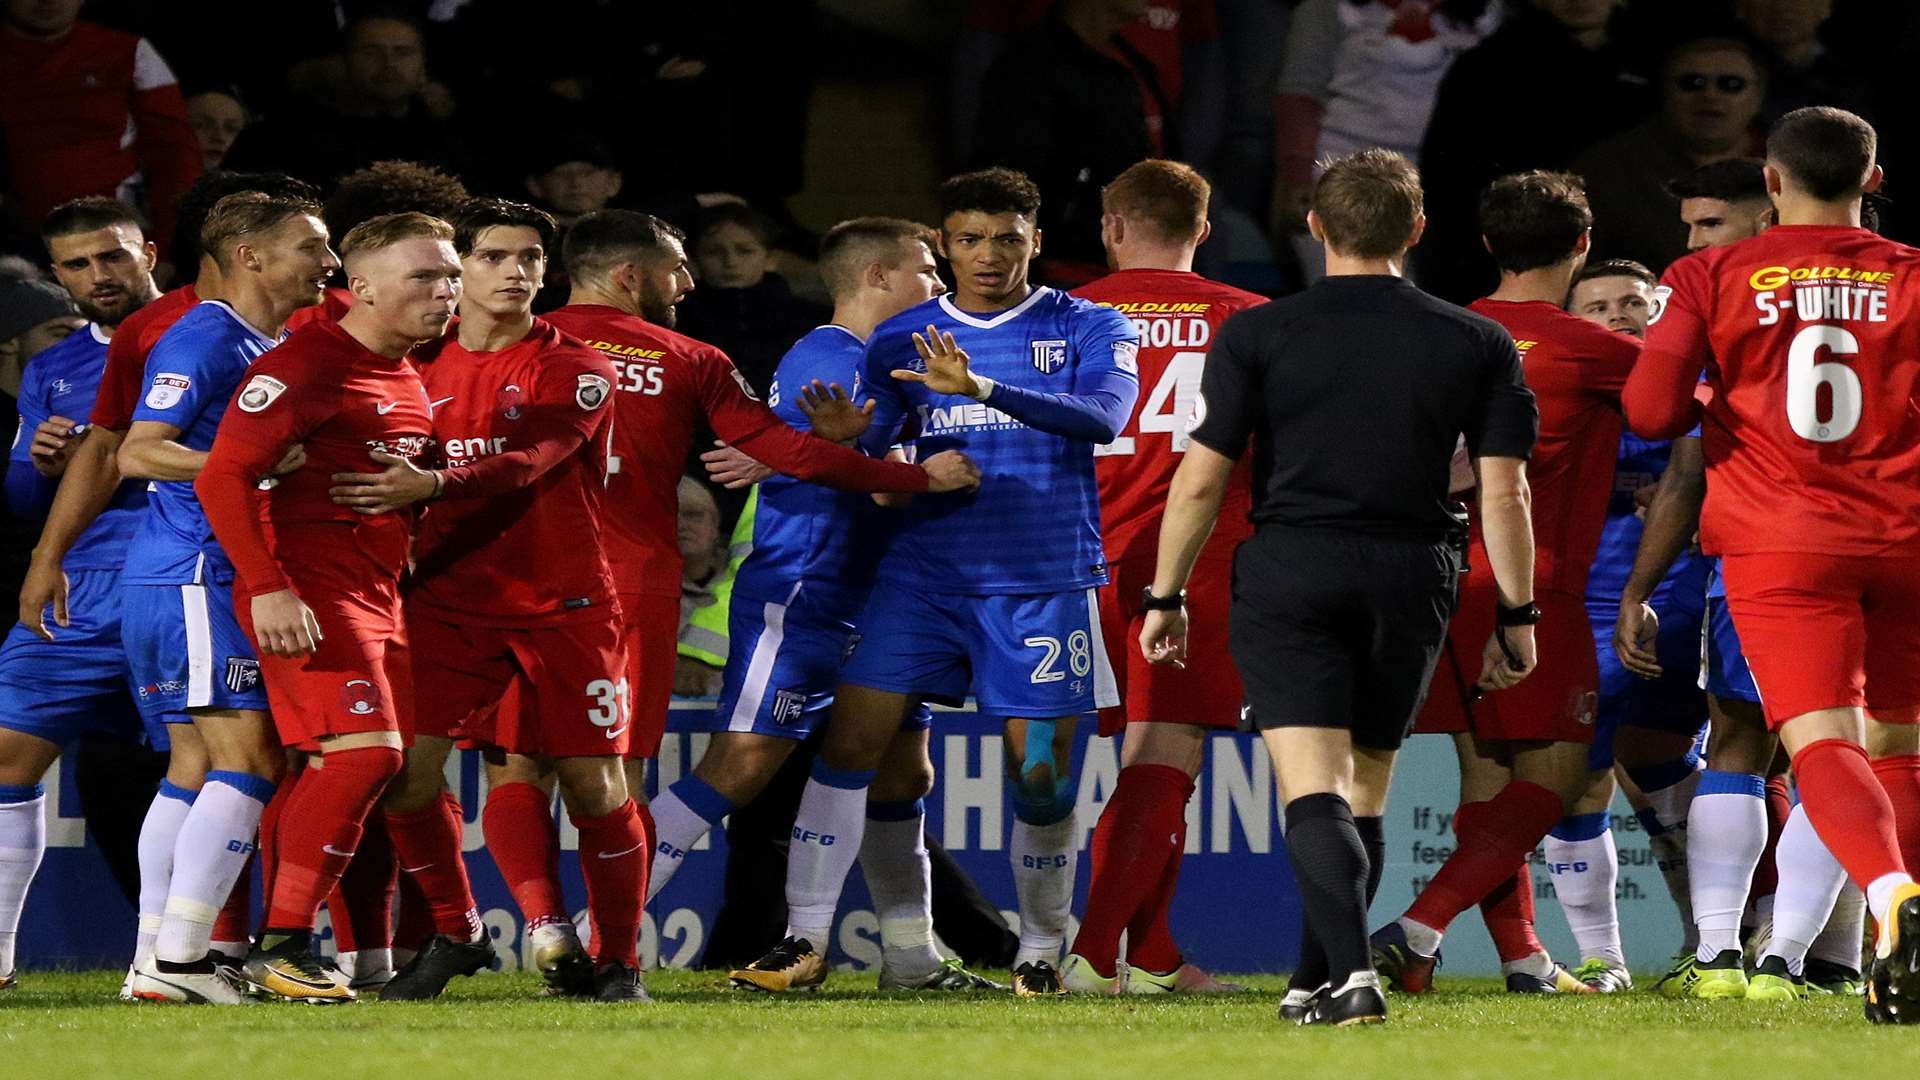 Tempers flare after some feisty challenges Picture: Andy Jones